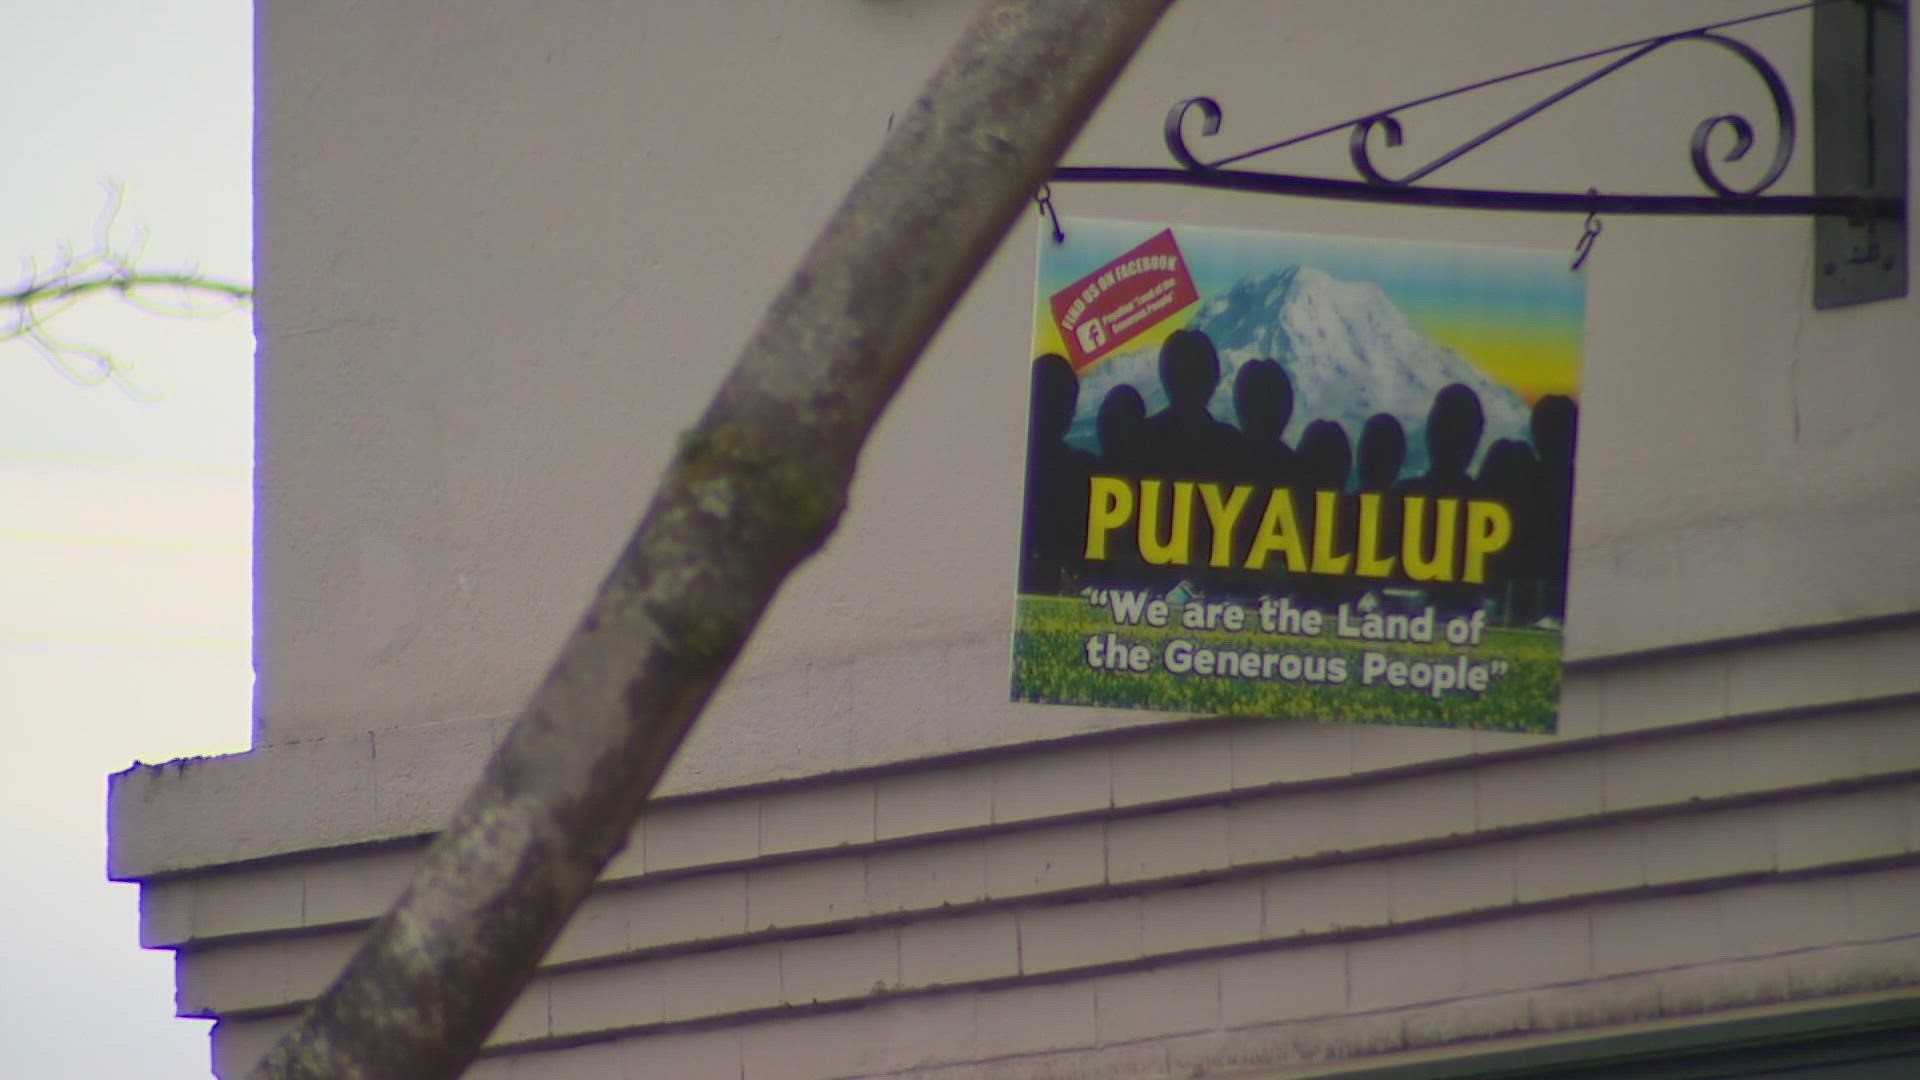 Attendance data from a local resource center also shows more people are seeking out help in the Puyallup area.